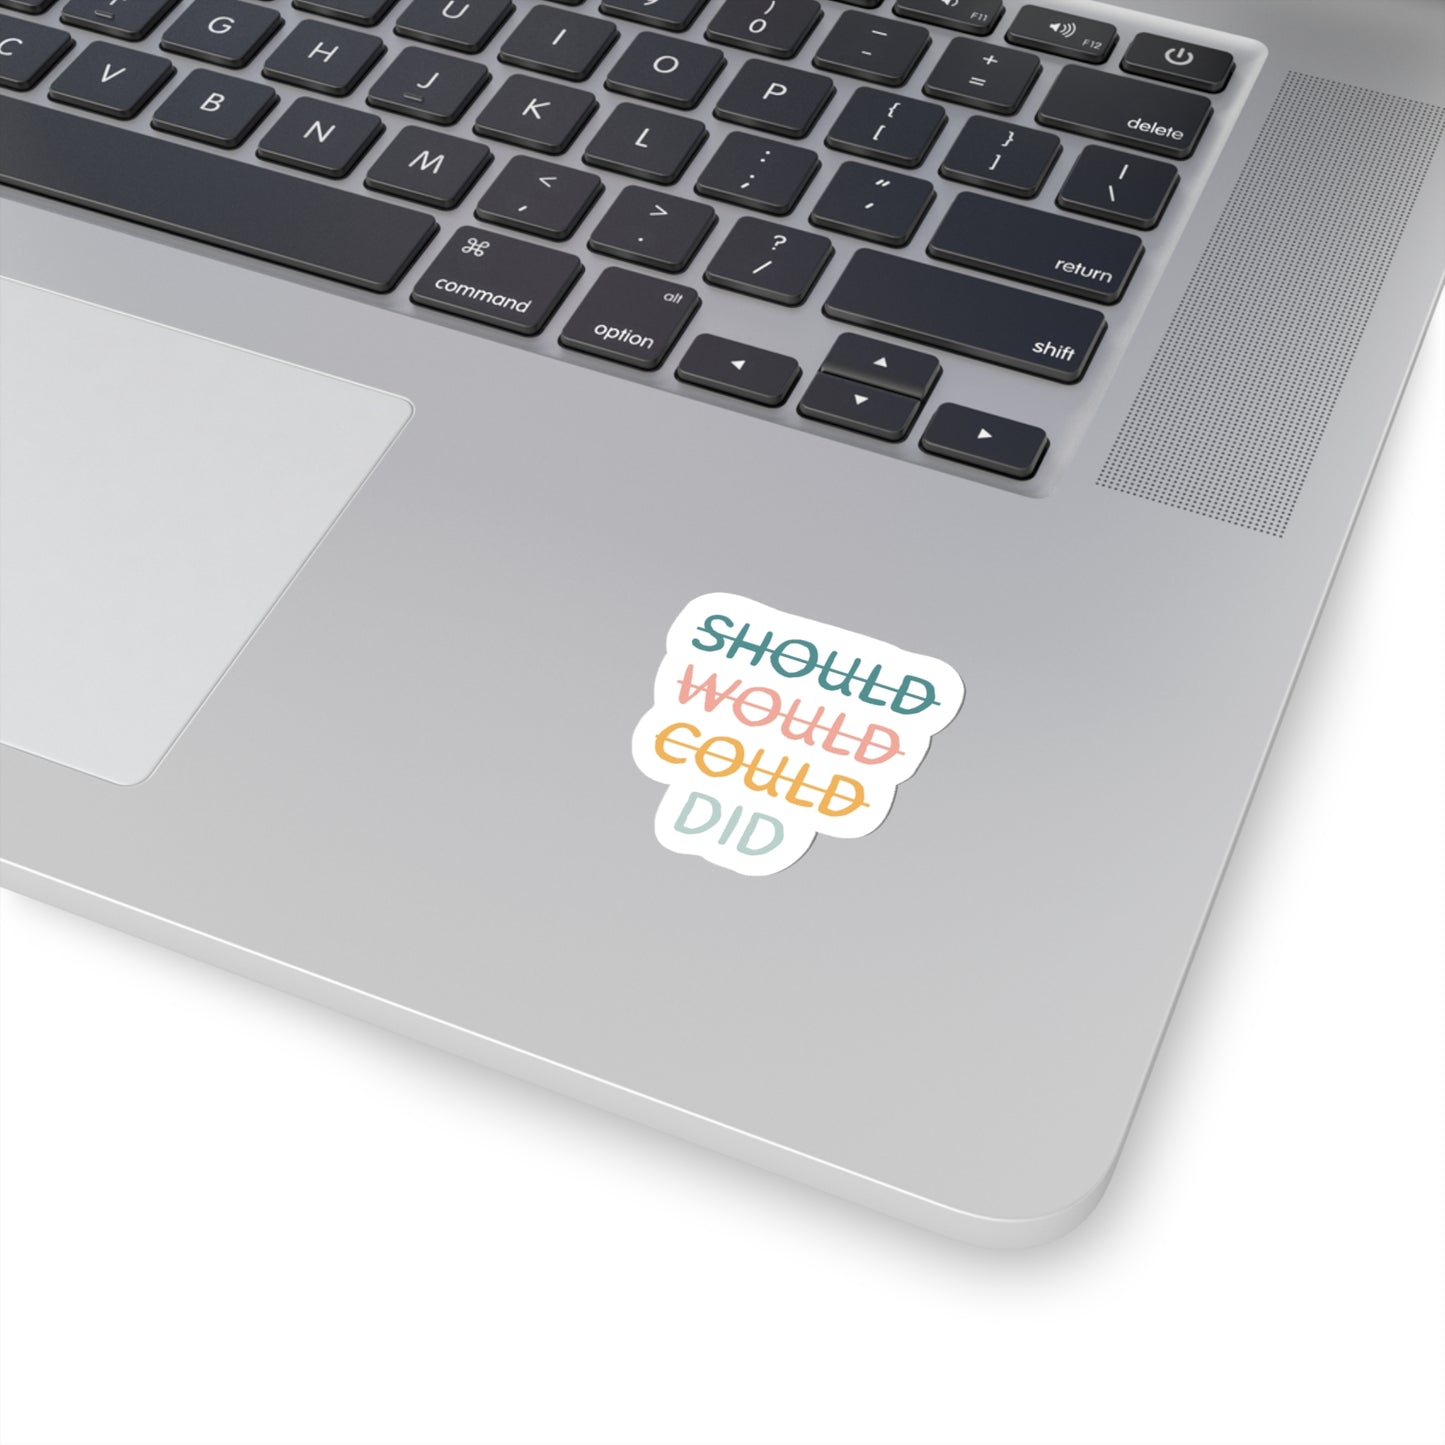 Should Would Could Did Sticker Bright Colors | Fun Stickers | Happy Stickers | Must Have Stickers | Laptop Stickers | Best Stickers | Gift